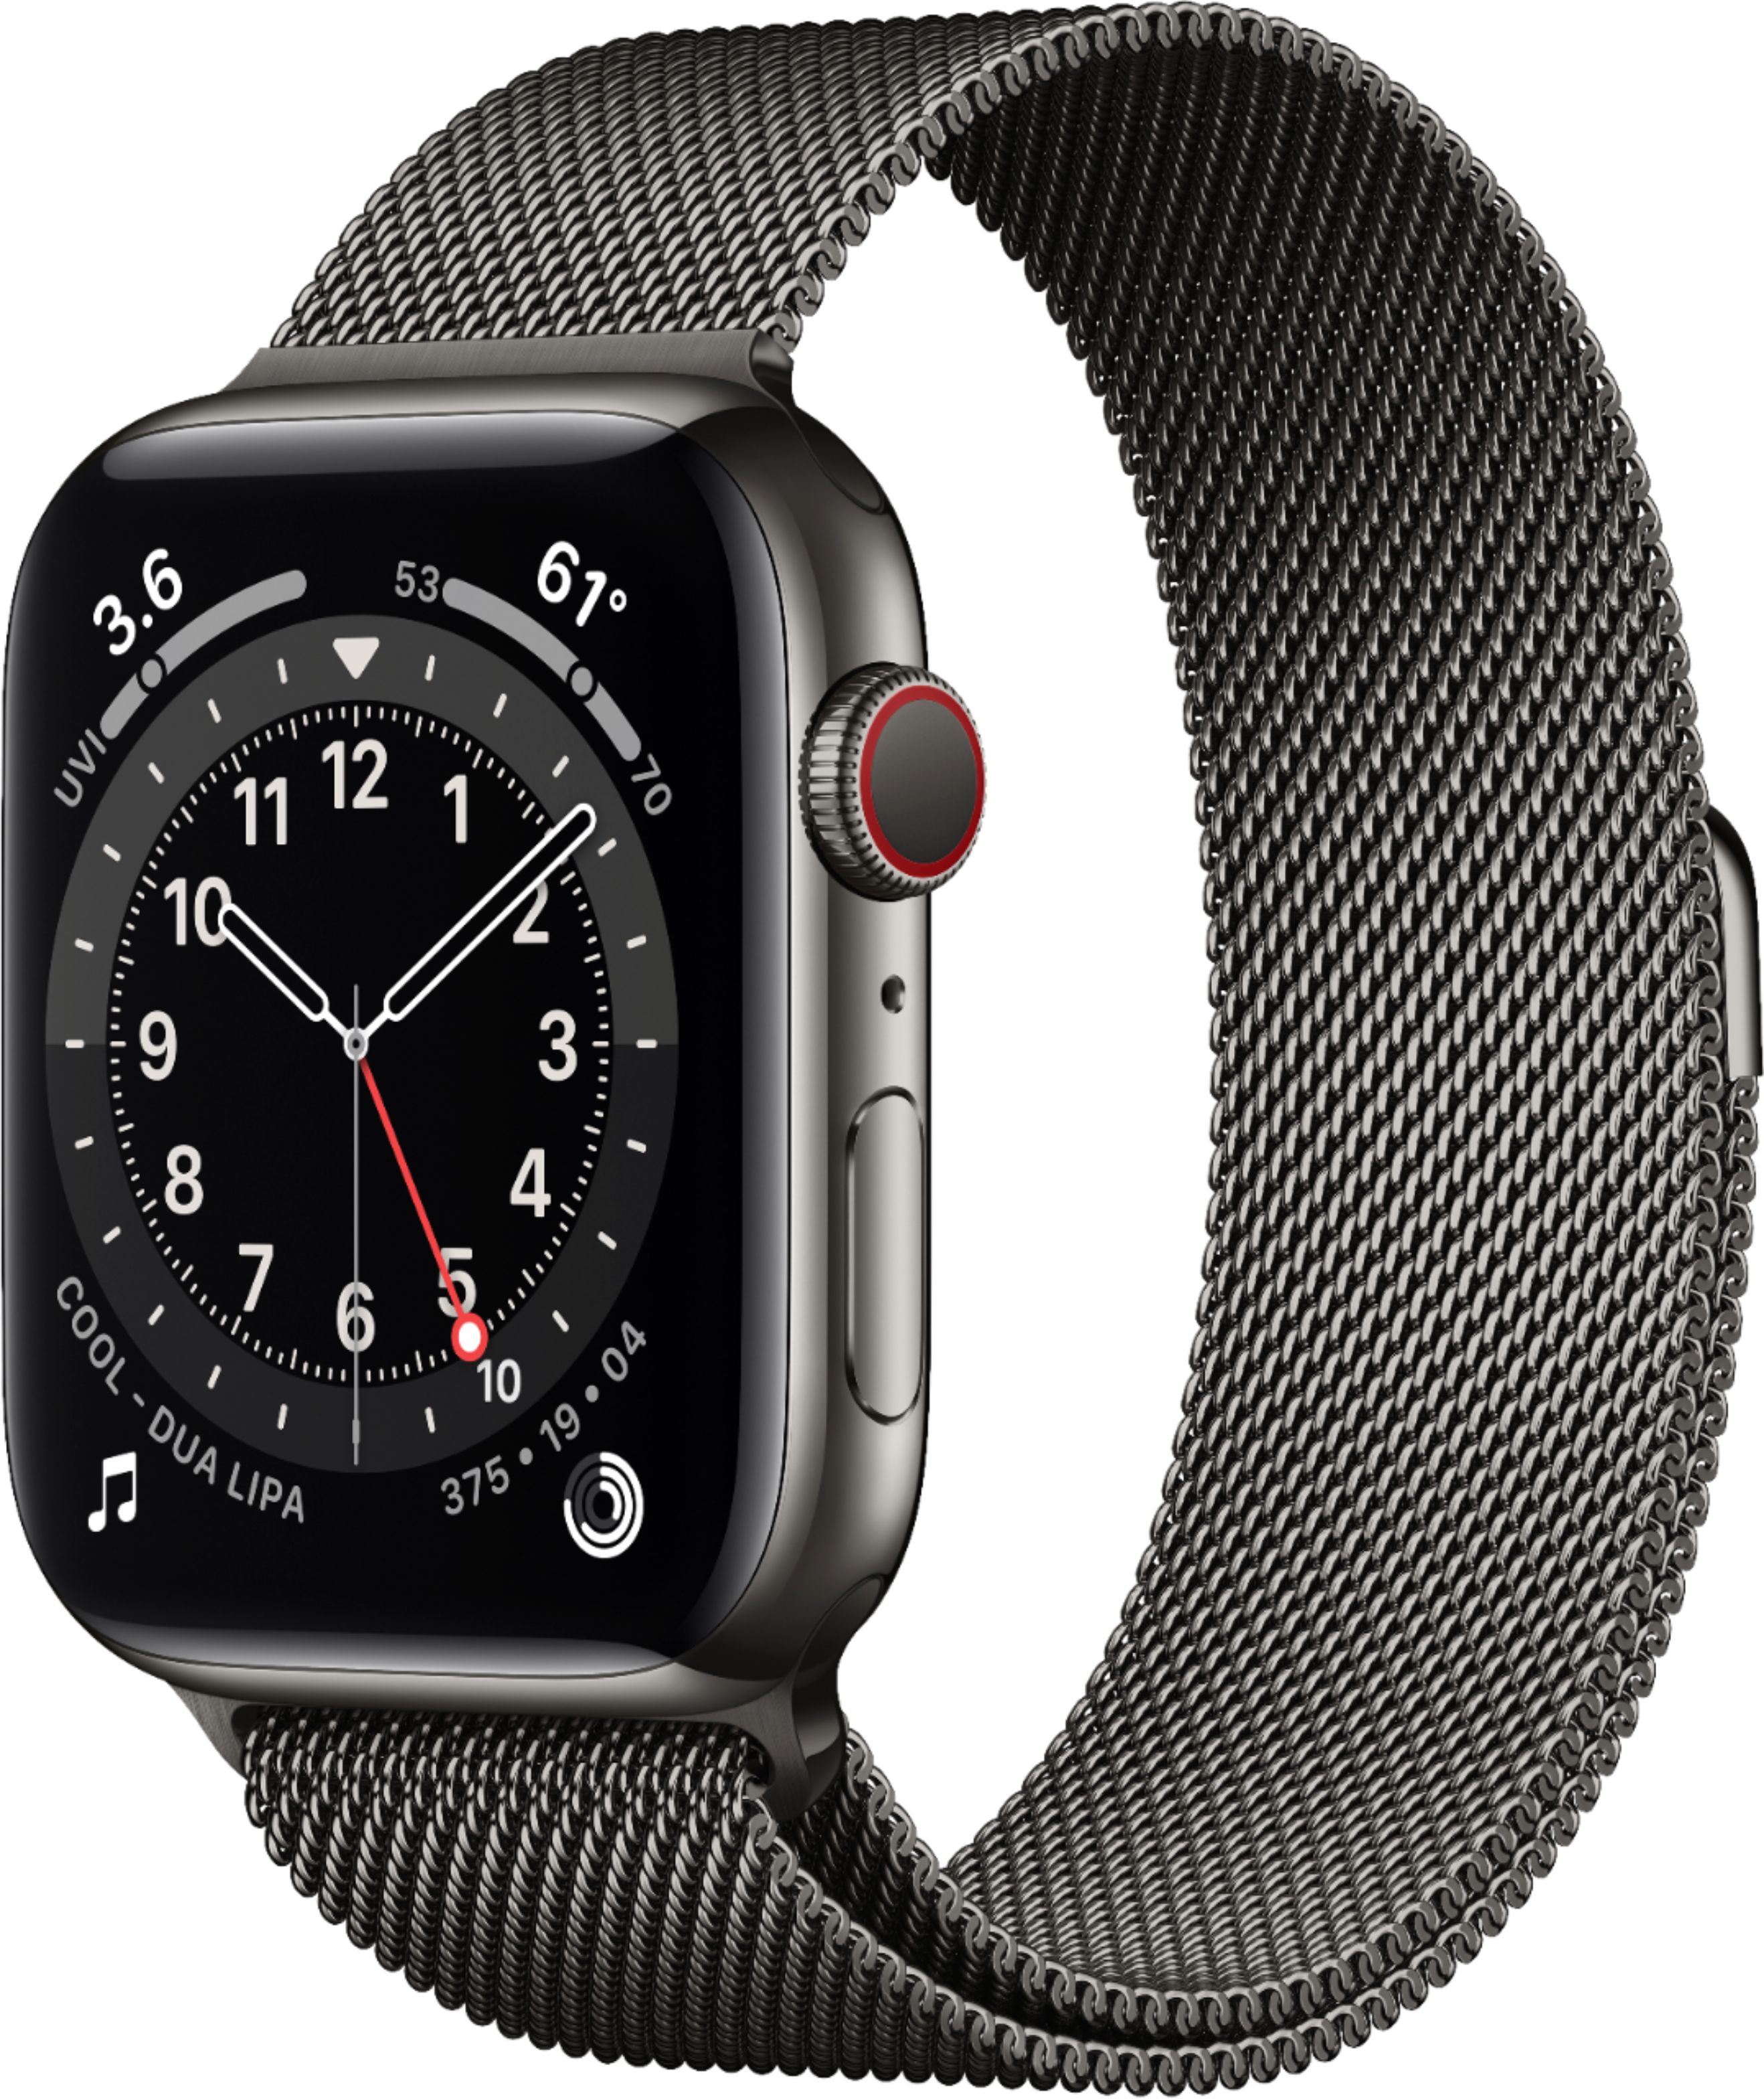 Apple Watch Series 6 (GPS + Cellular) 44mm Graphite Stainless Steel Case with Graphite Milanese